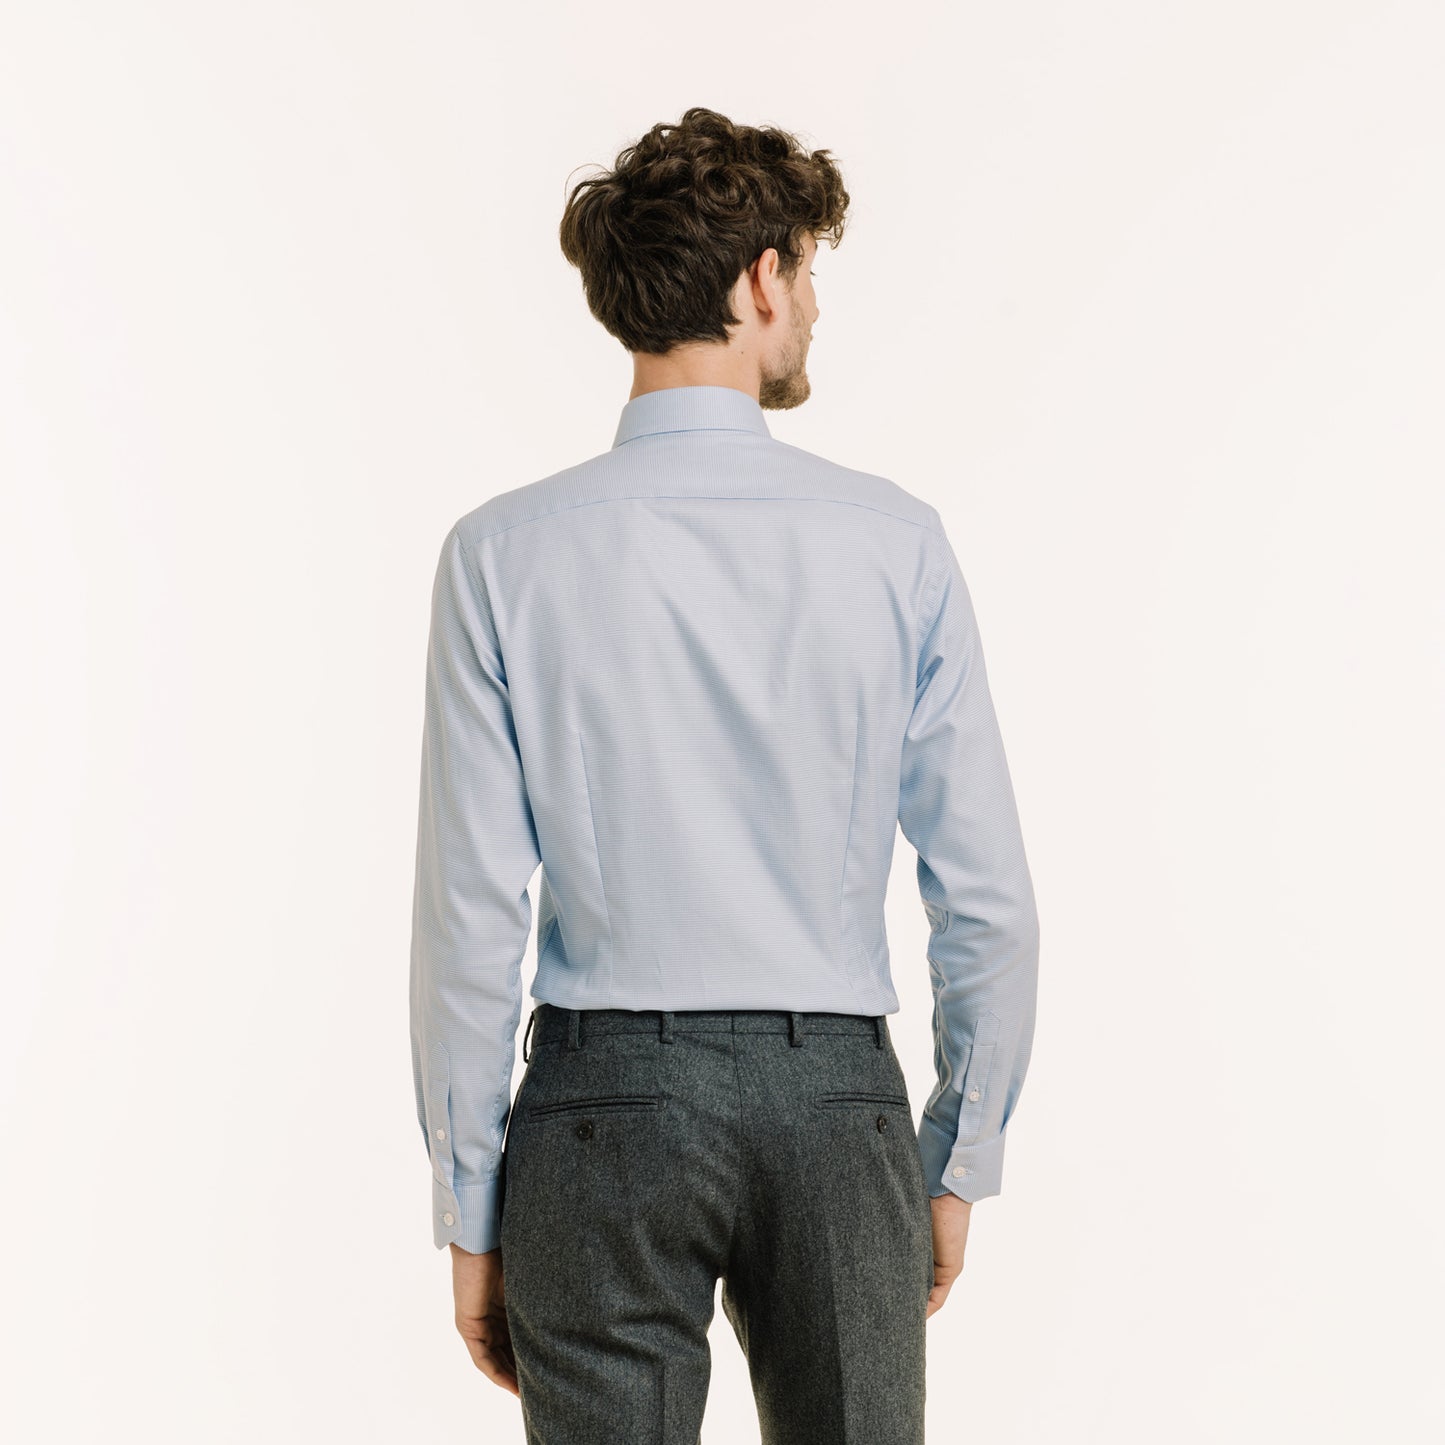 Fitted shirt in blue double-twisted houndstooth Oxford